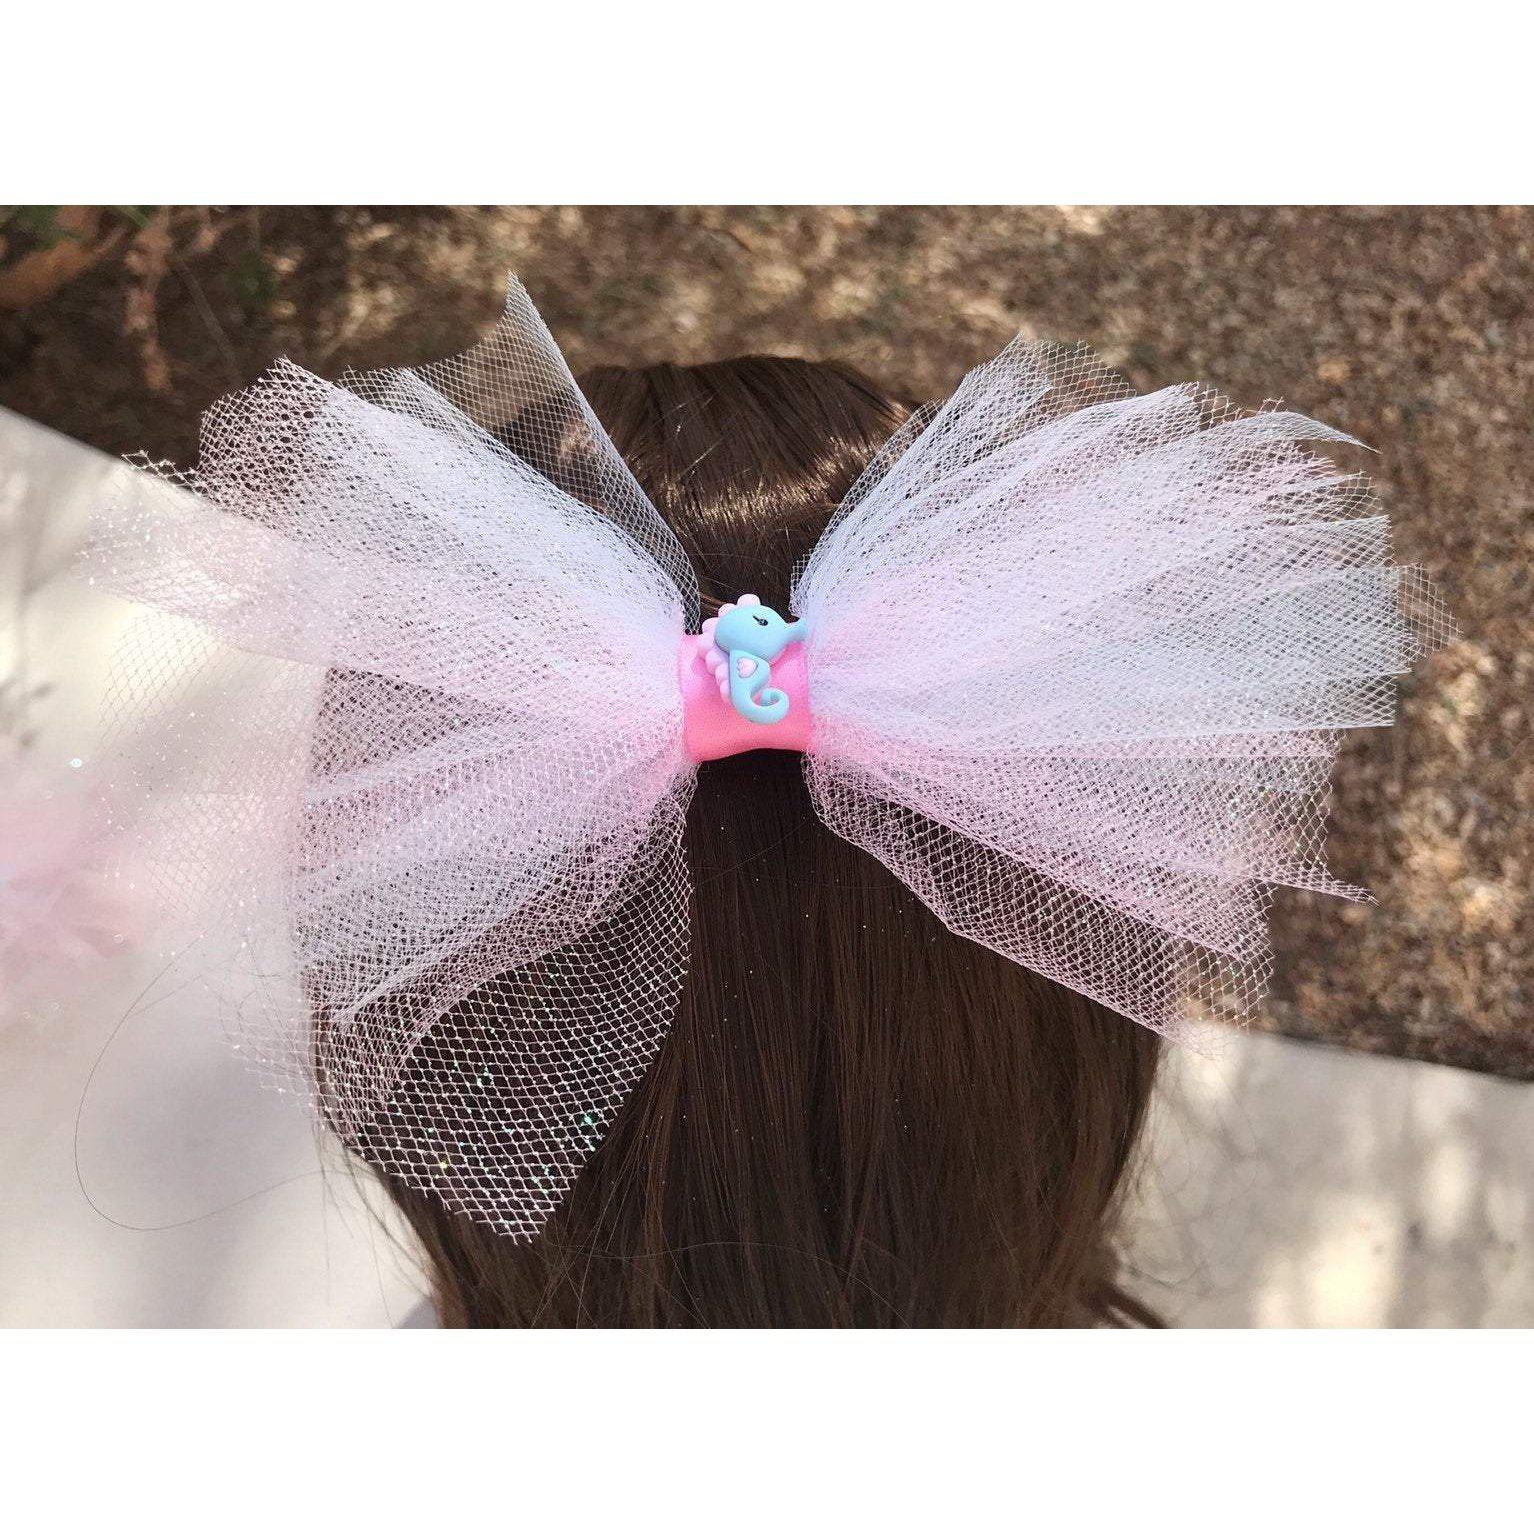 Pink Hair Bow with Blue Seahorse - Whimsical and Playful Hair Accessory